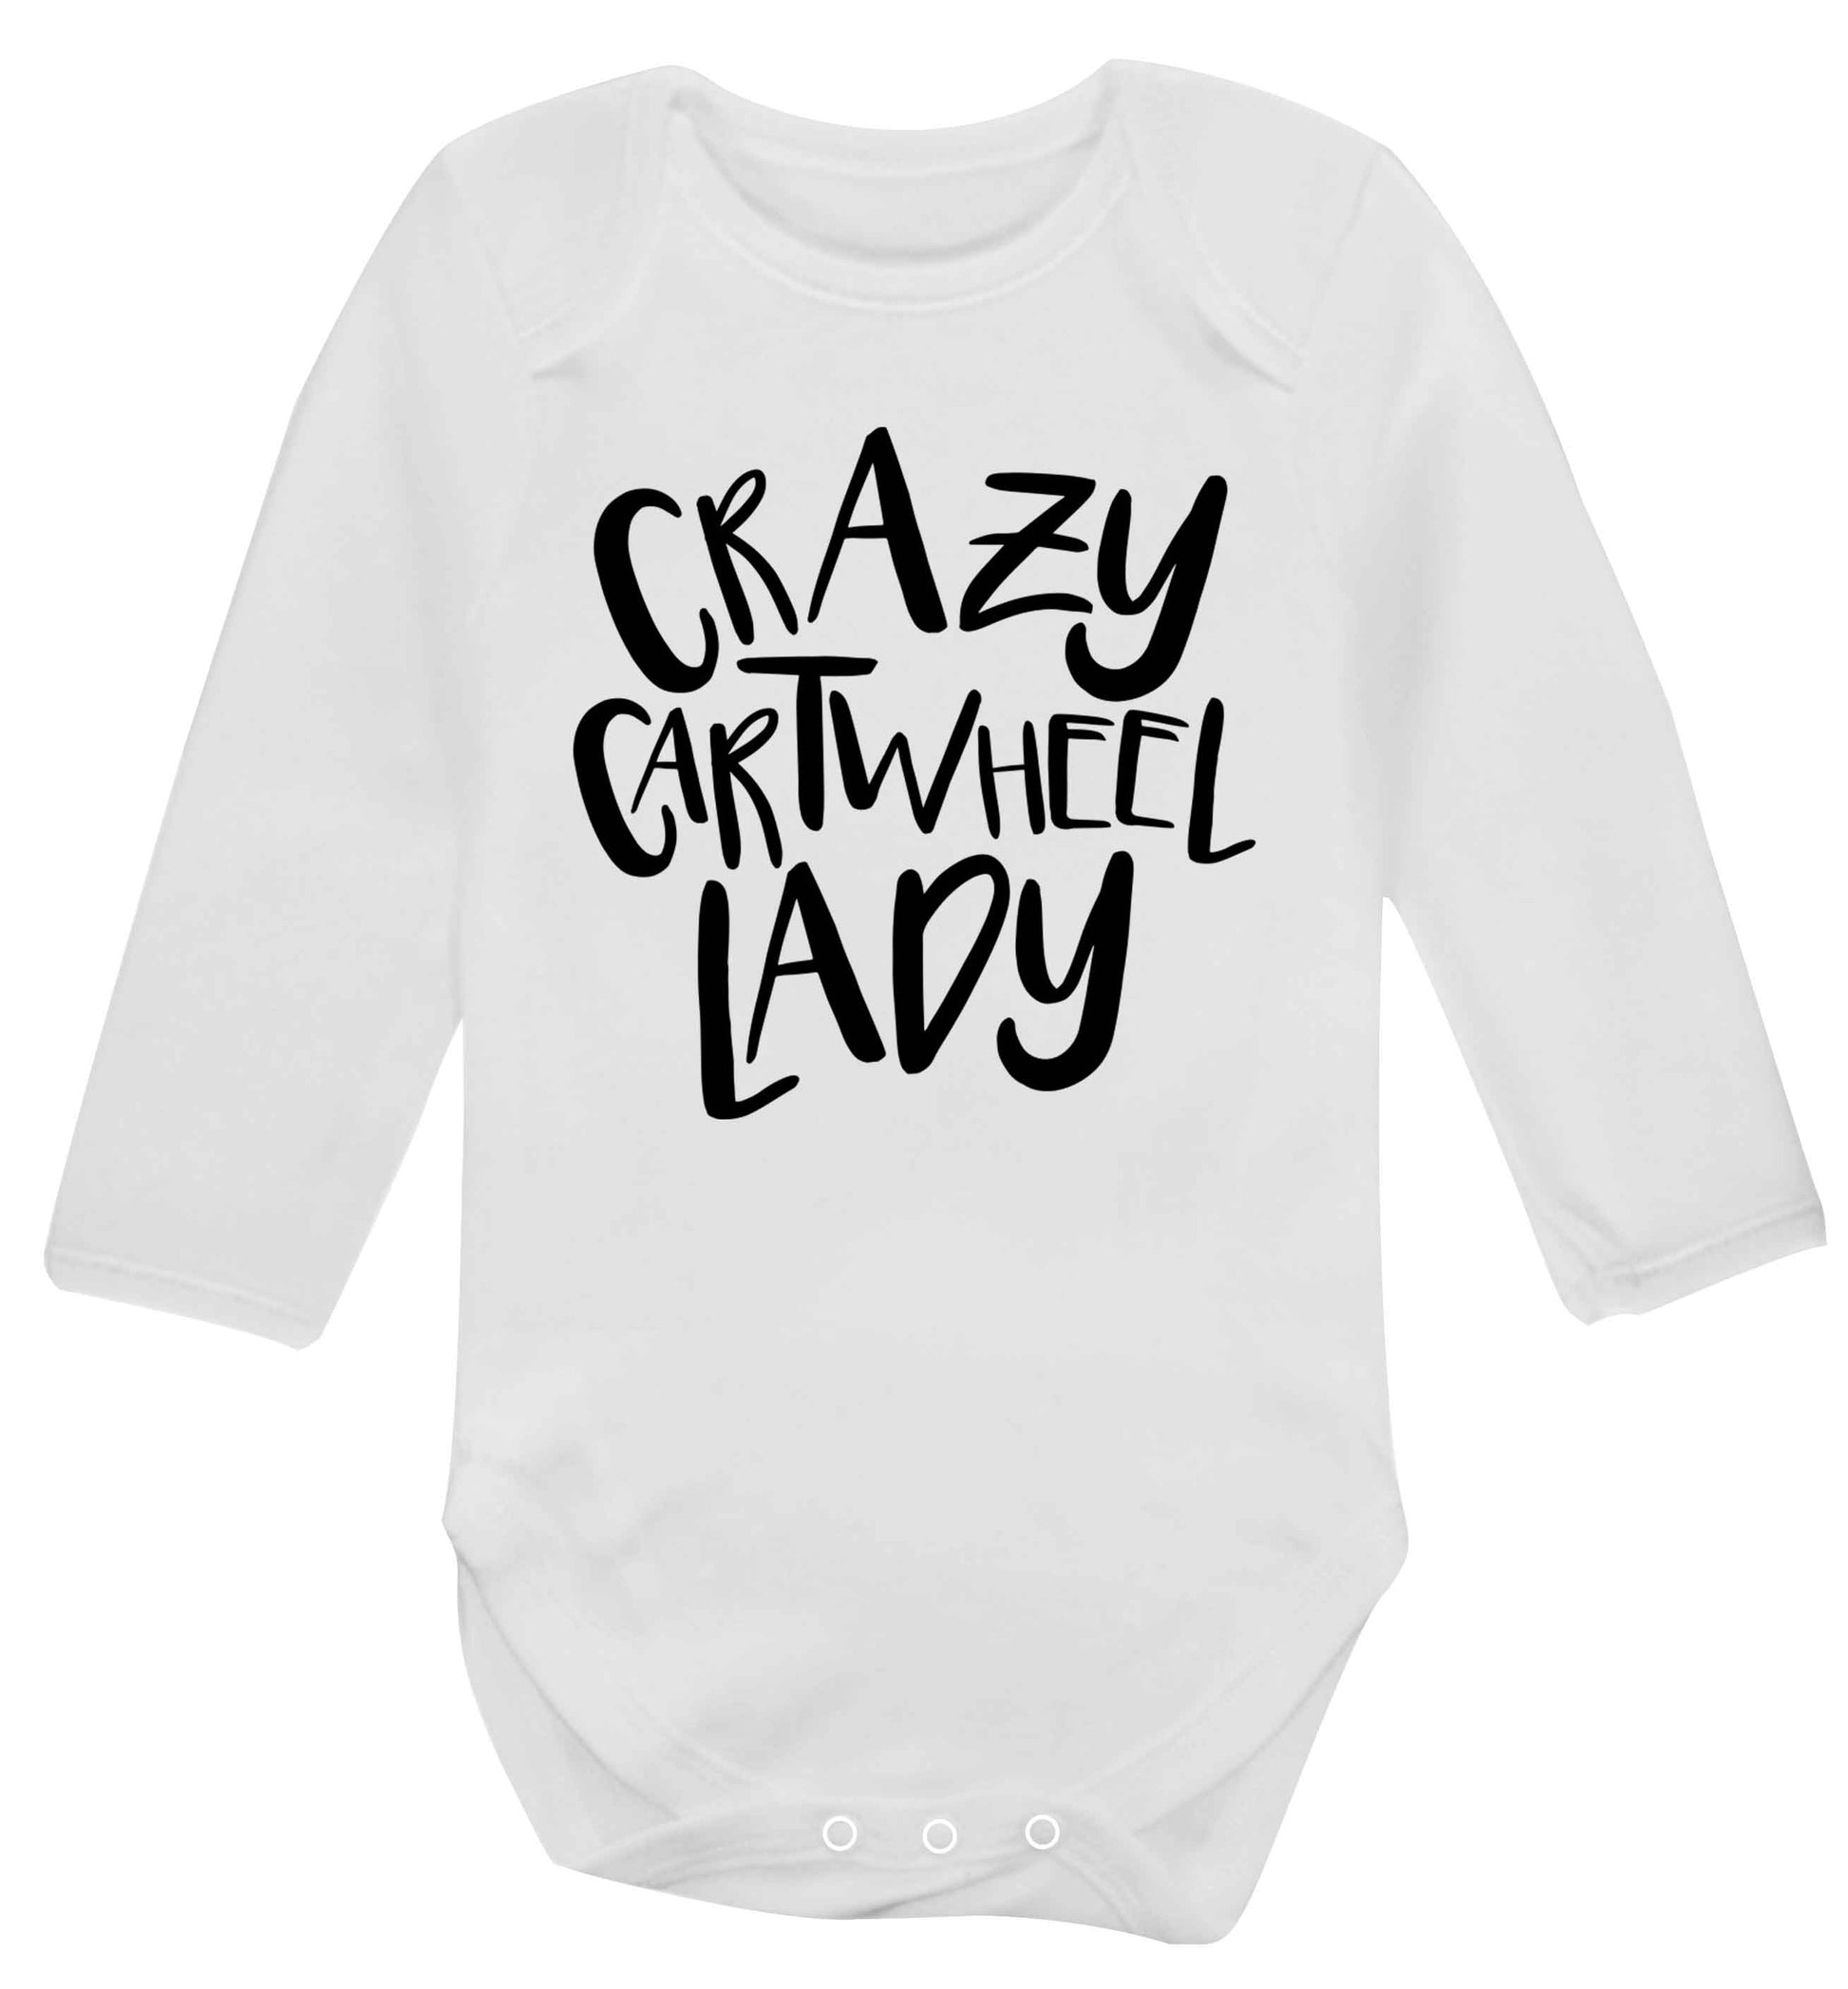 Crazy cartwheel lady Baby Vest long sleeved white 6-12 months